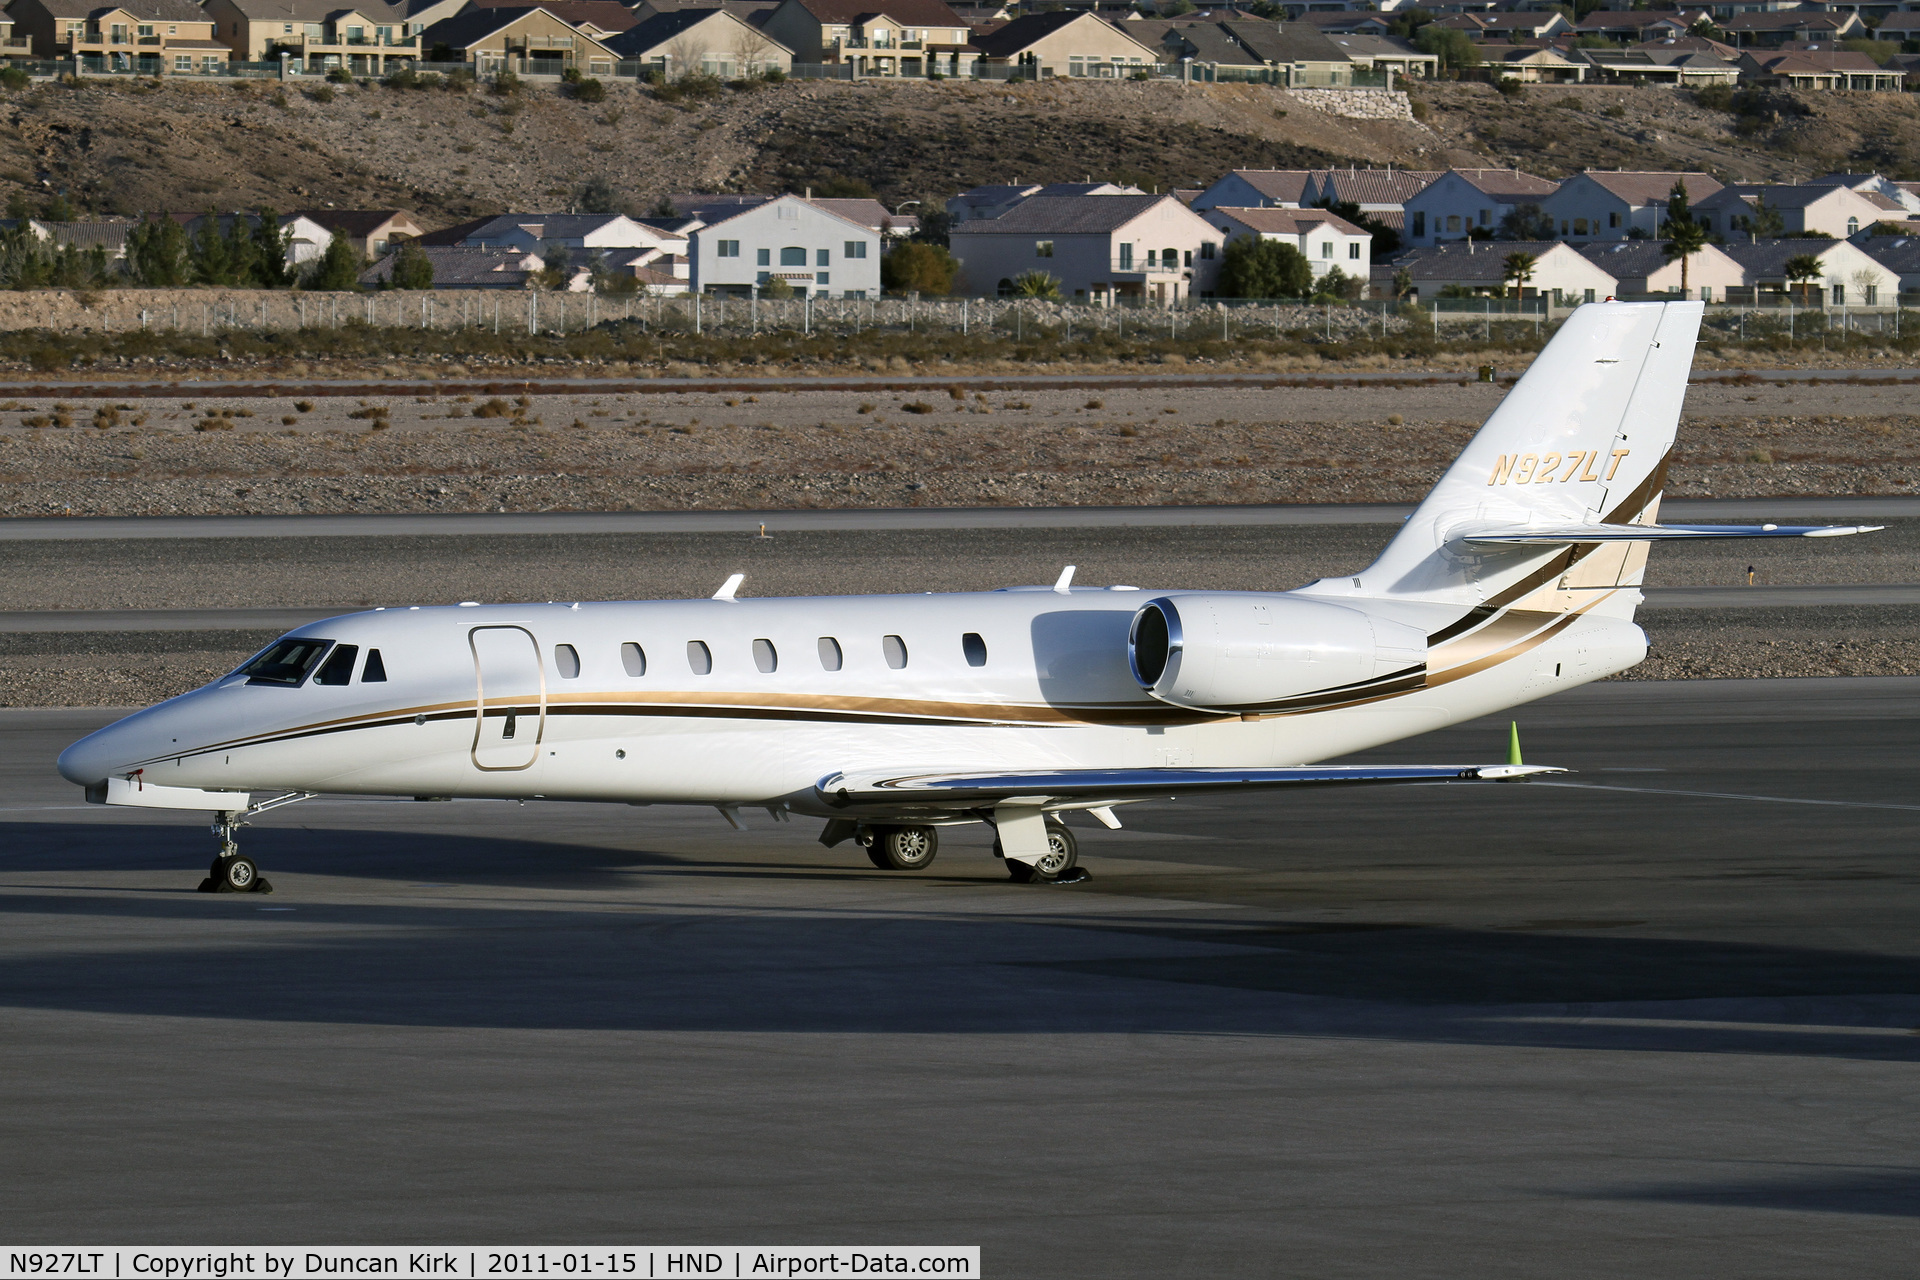 N927LT, 2006 Cessna 680 Citation Sovereign C/N 680-0070, Evening shadows close in on this Sovereign